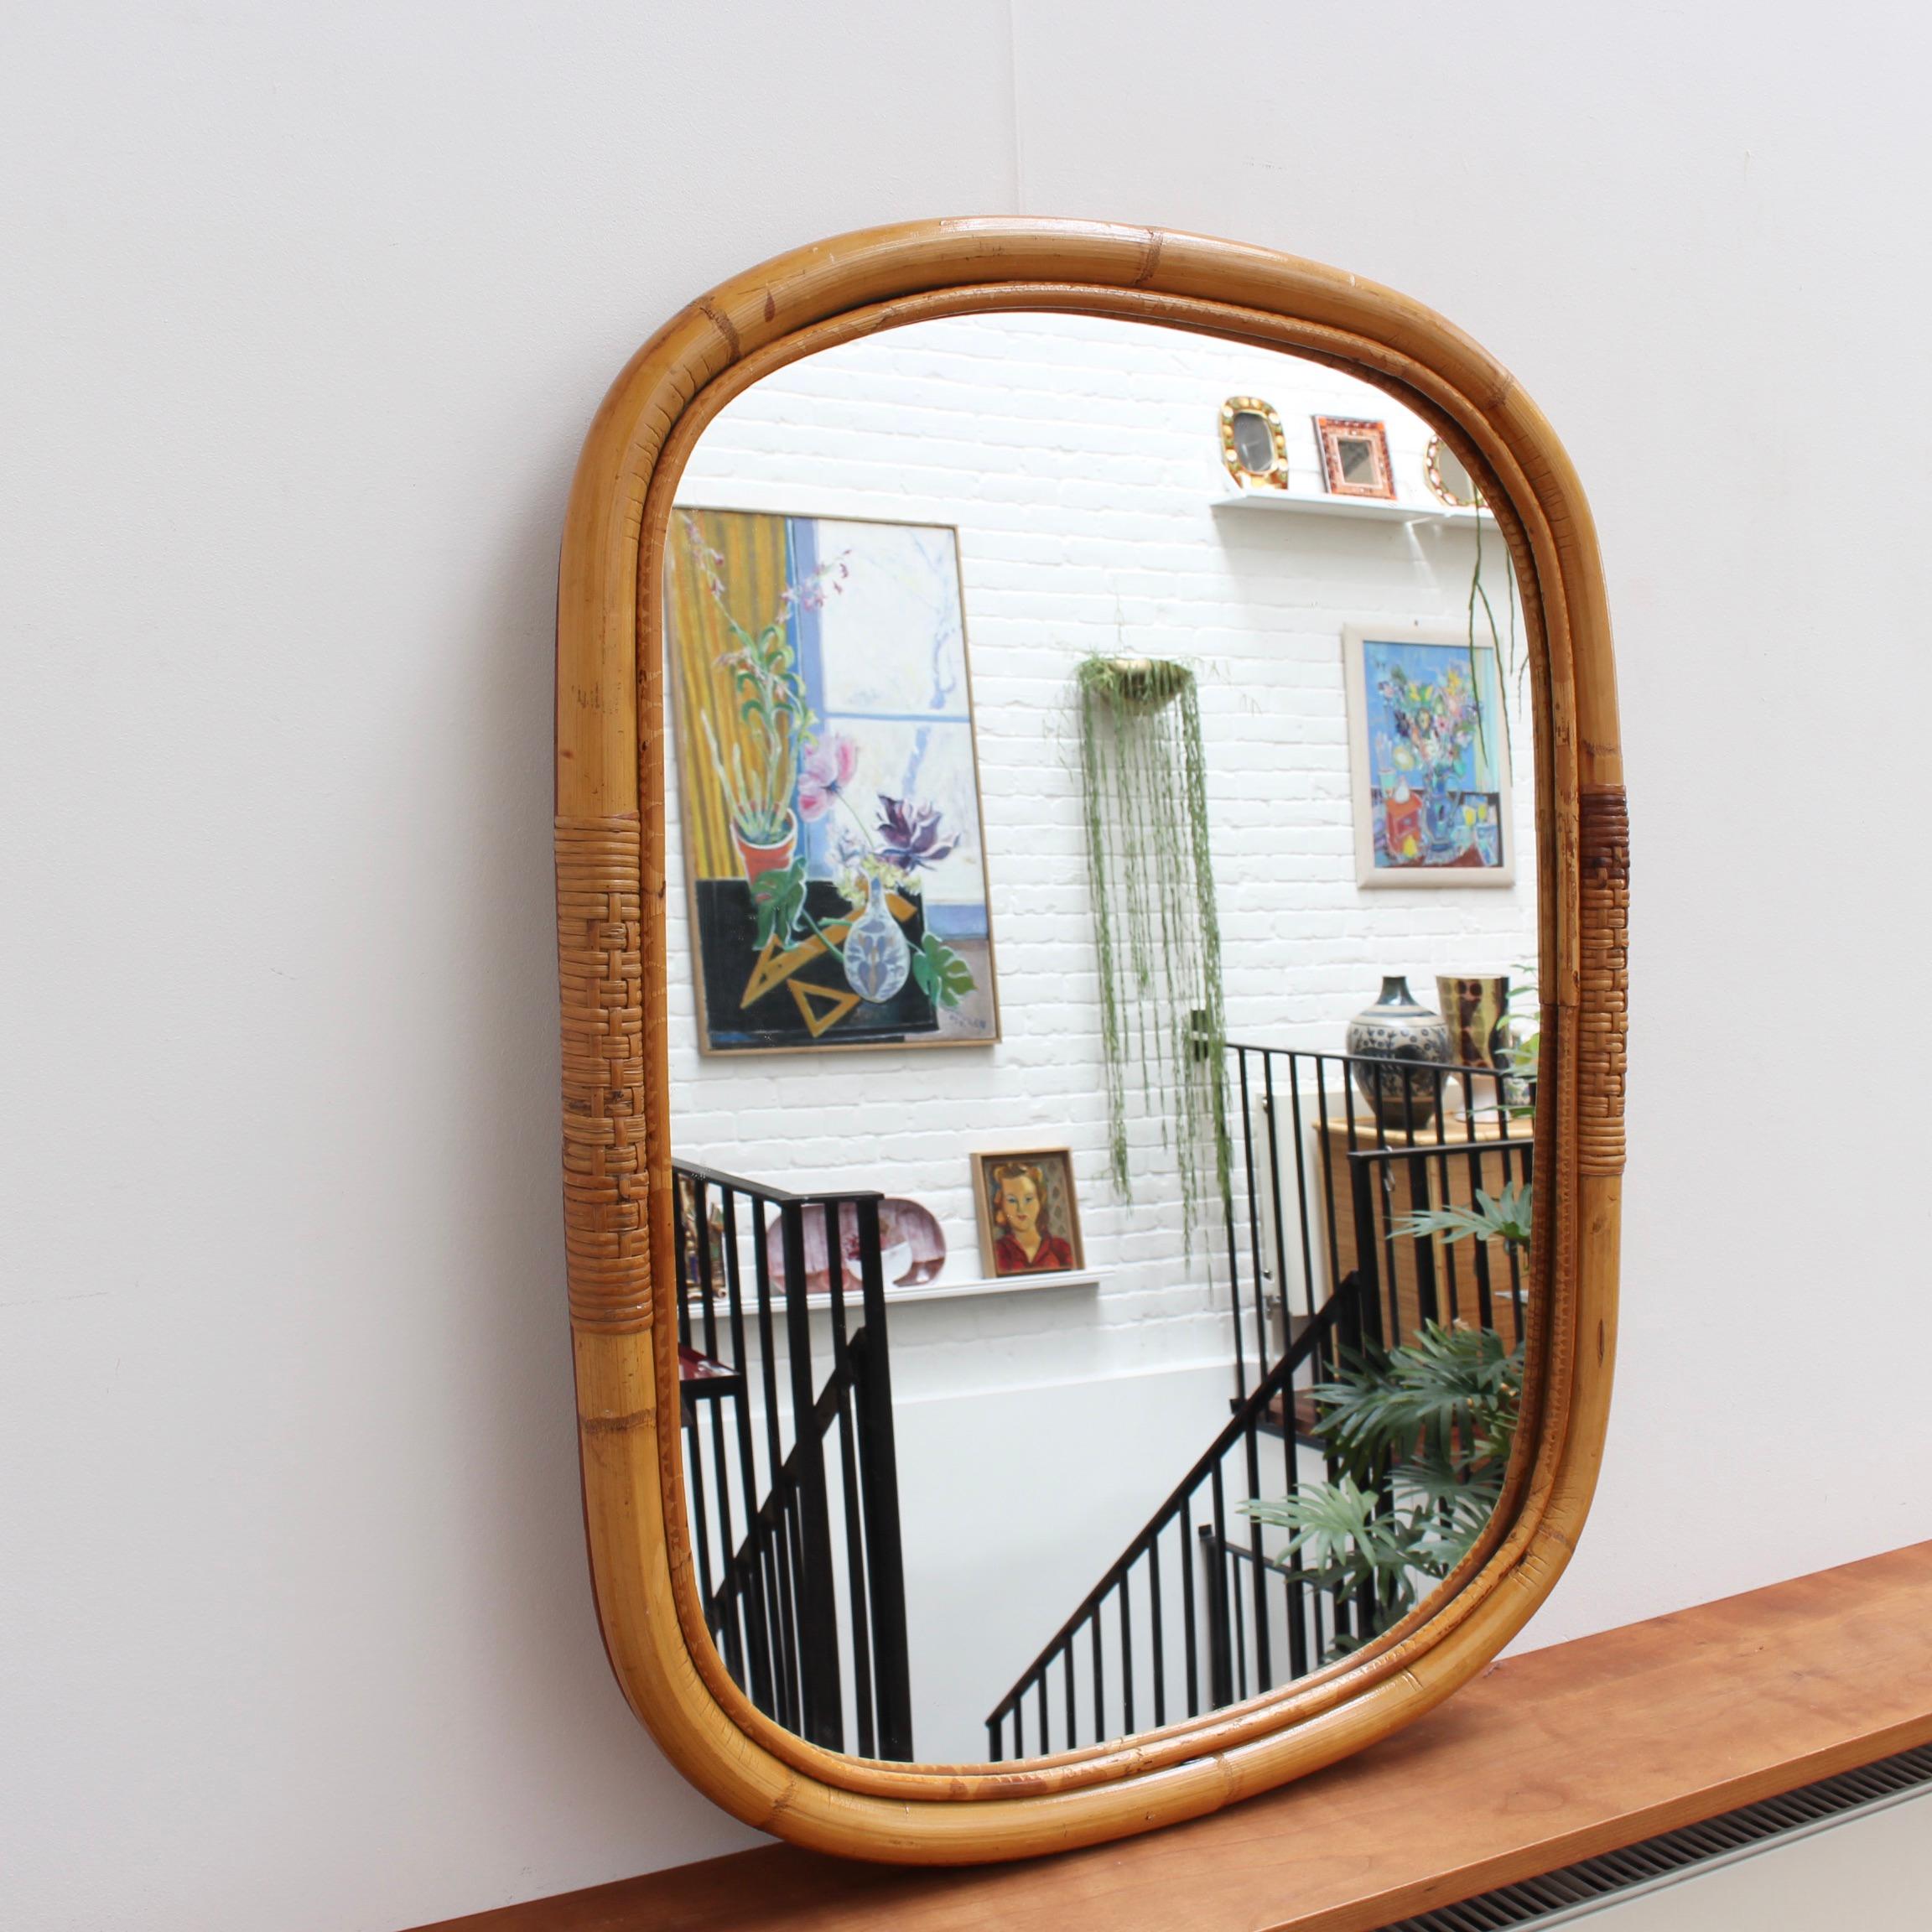 Mid-century Italian rattan wall mirror (circa 1960s). A distinctive vintage mirror which transports you immediately to another place and another time, perhaps the Italian Riviera or Miami's South Beach circa 1960. Its substantial glass is